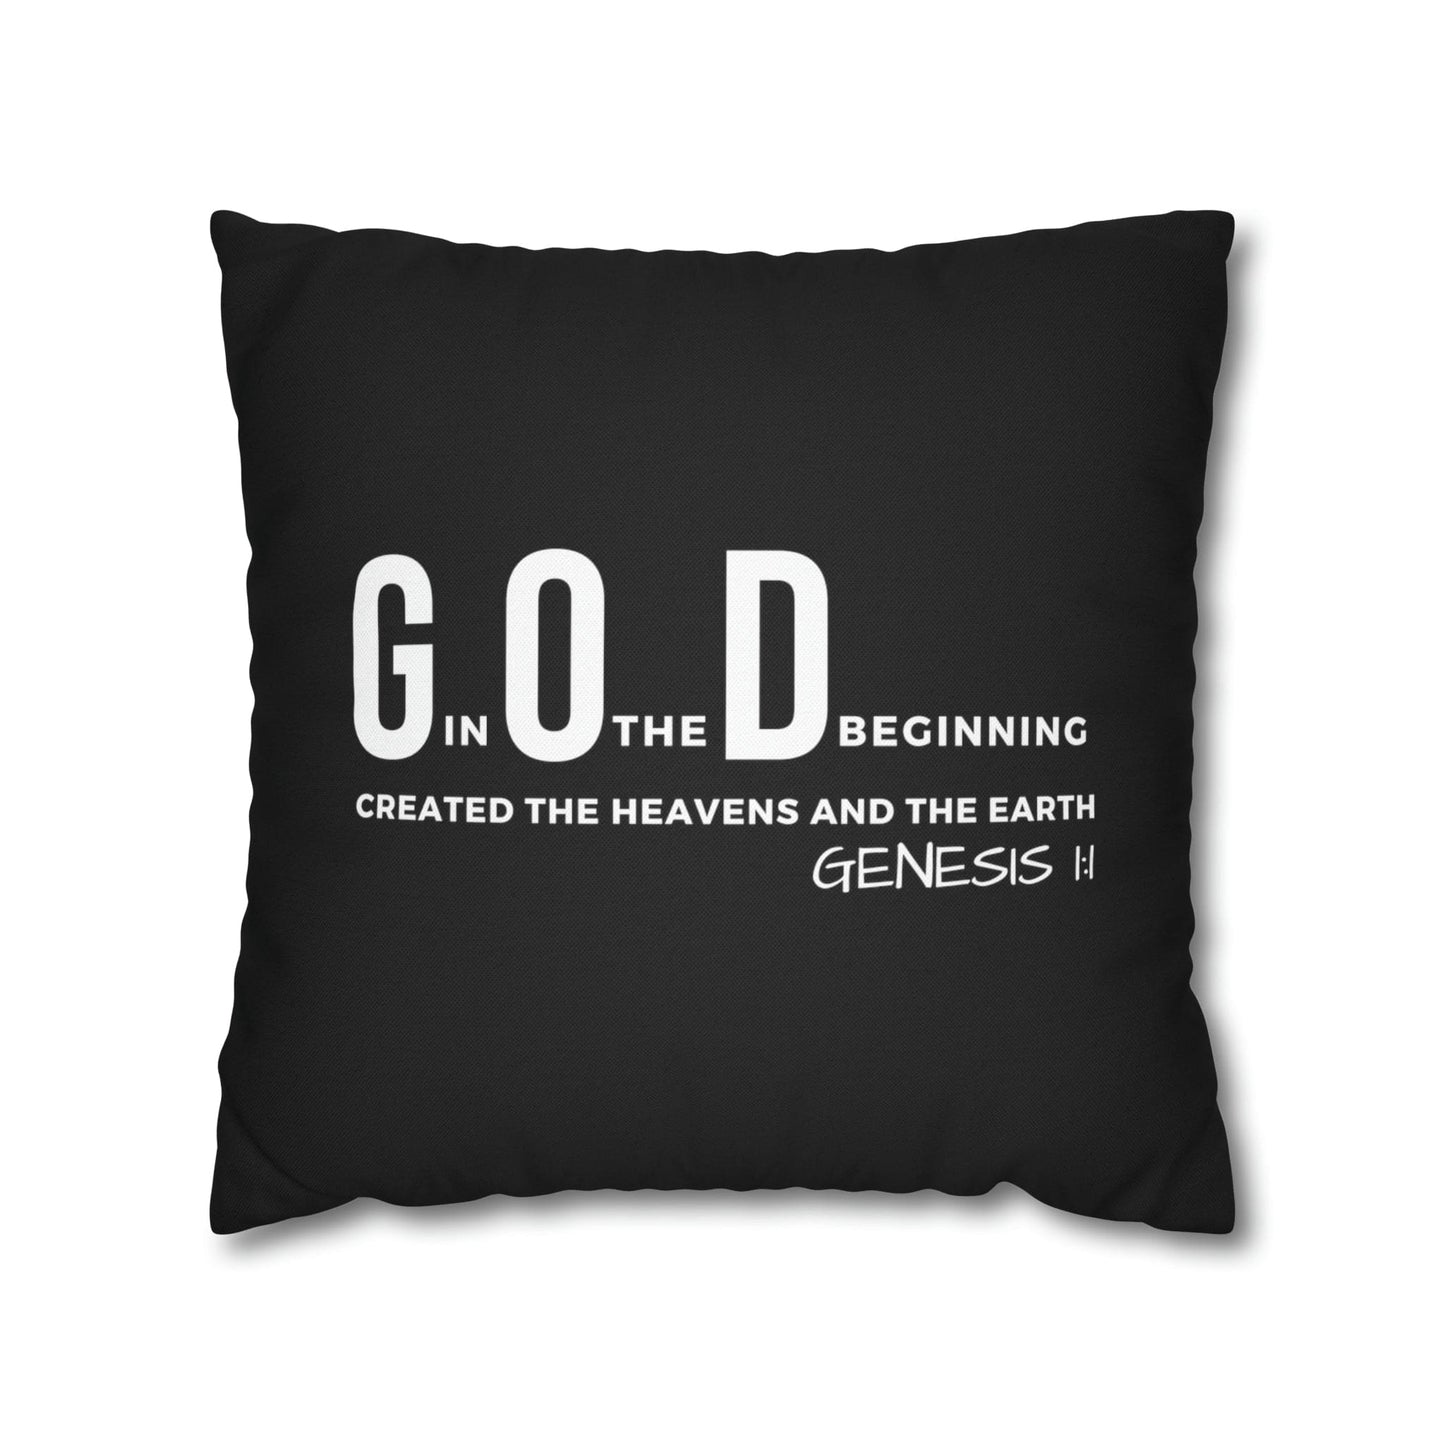 Decorative Throw Pillow Cover - Set Of 2, God In The Beginning Created The Heavens And The Earth - Scripture Verse-3